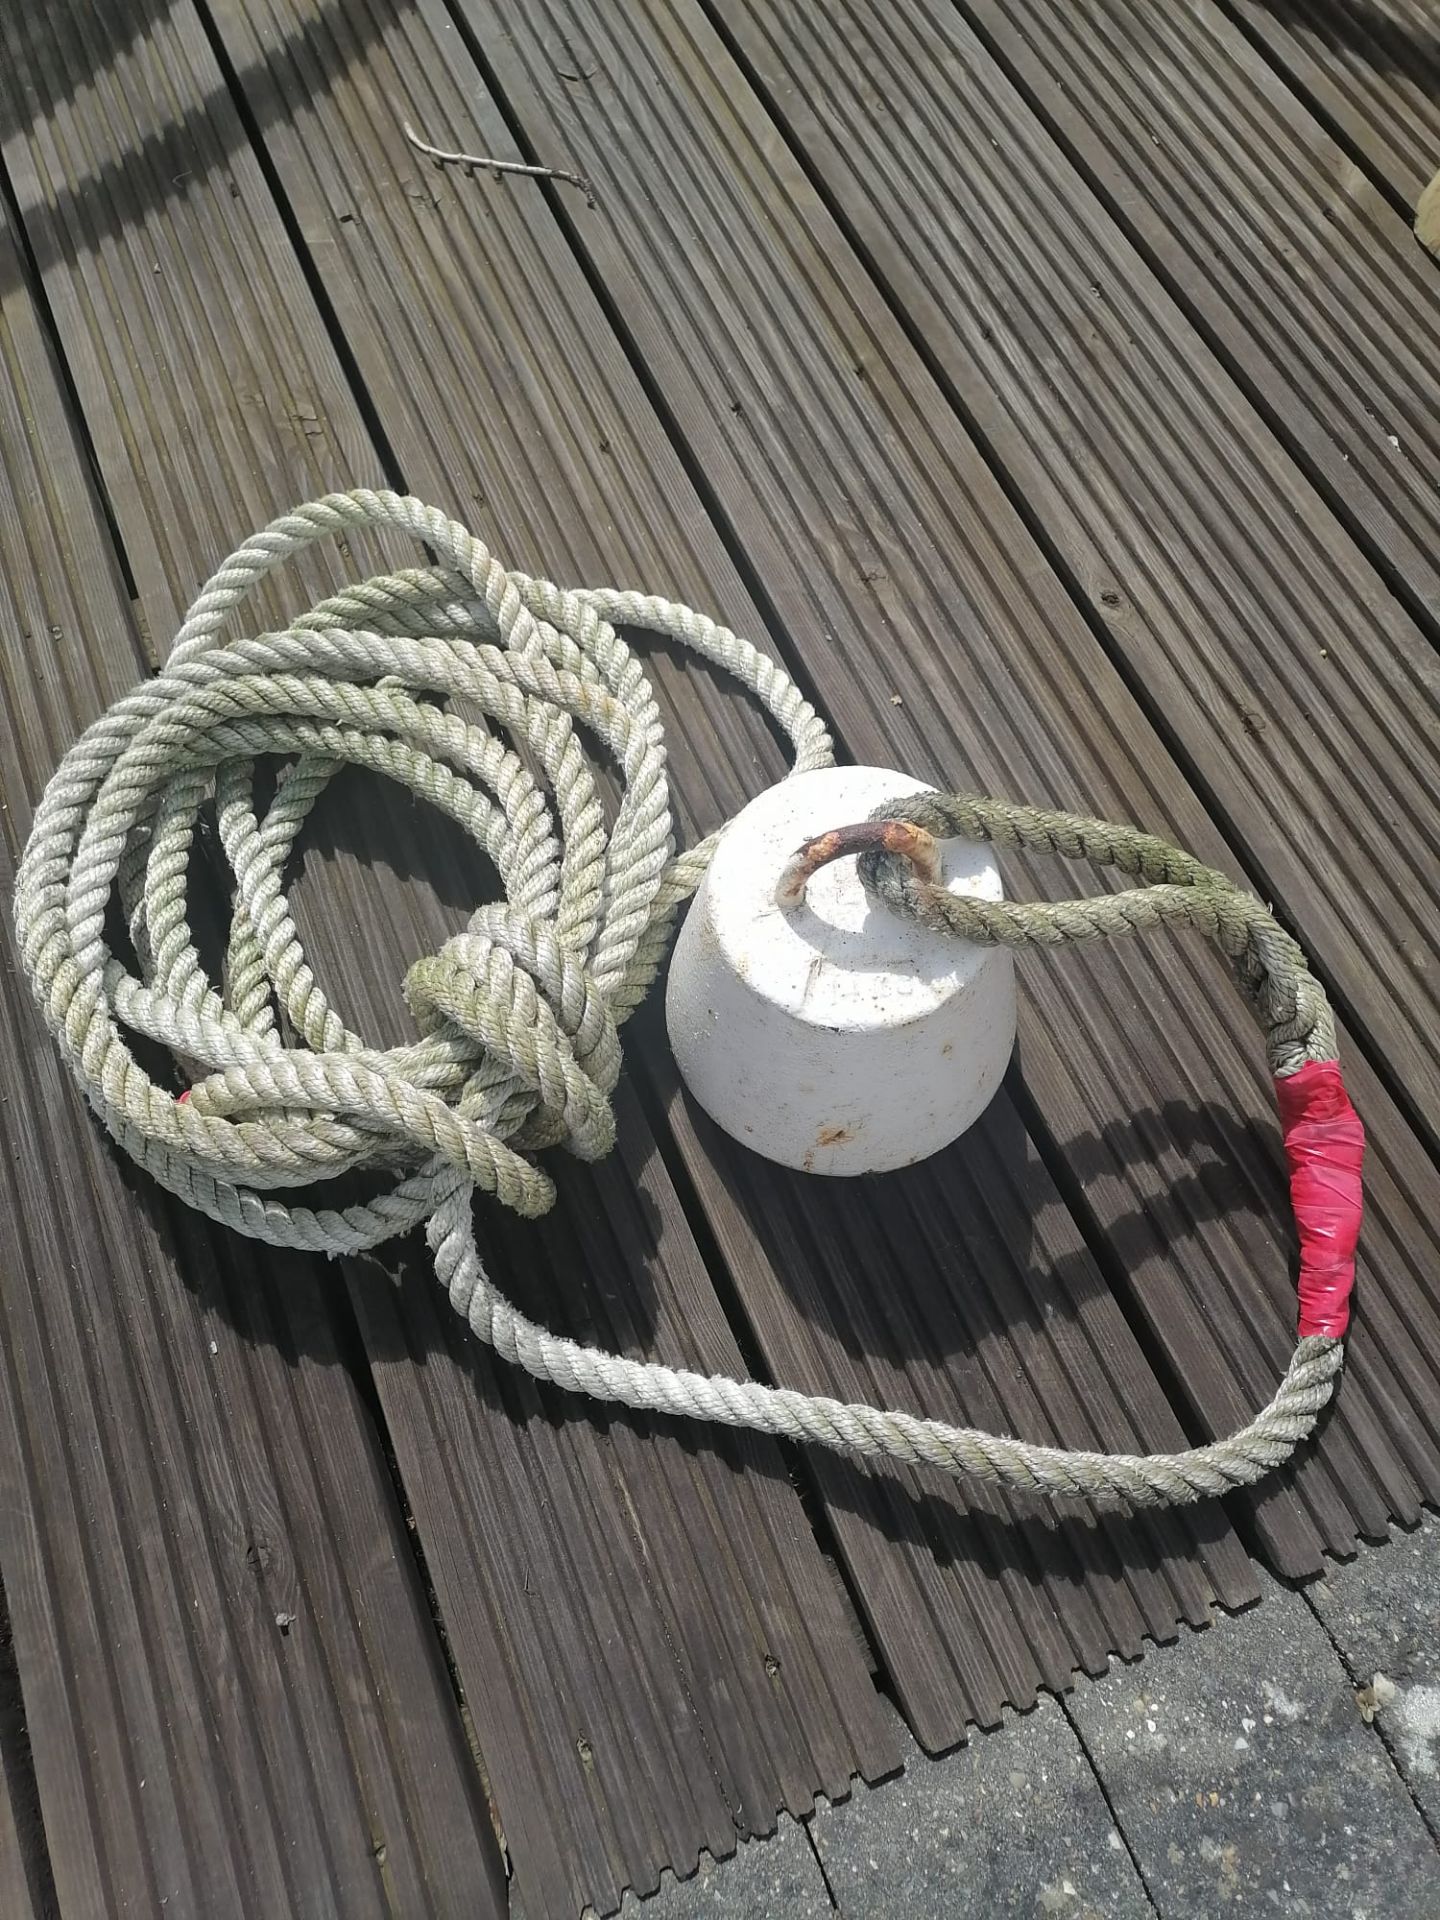 14kg mud weight and 25ft anchor rope